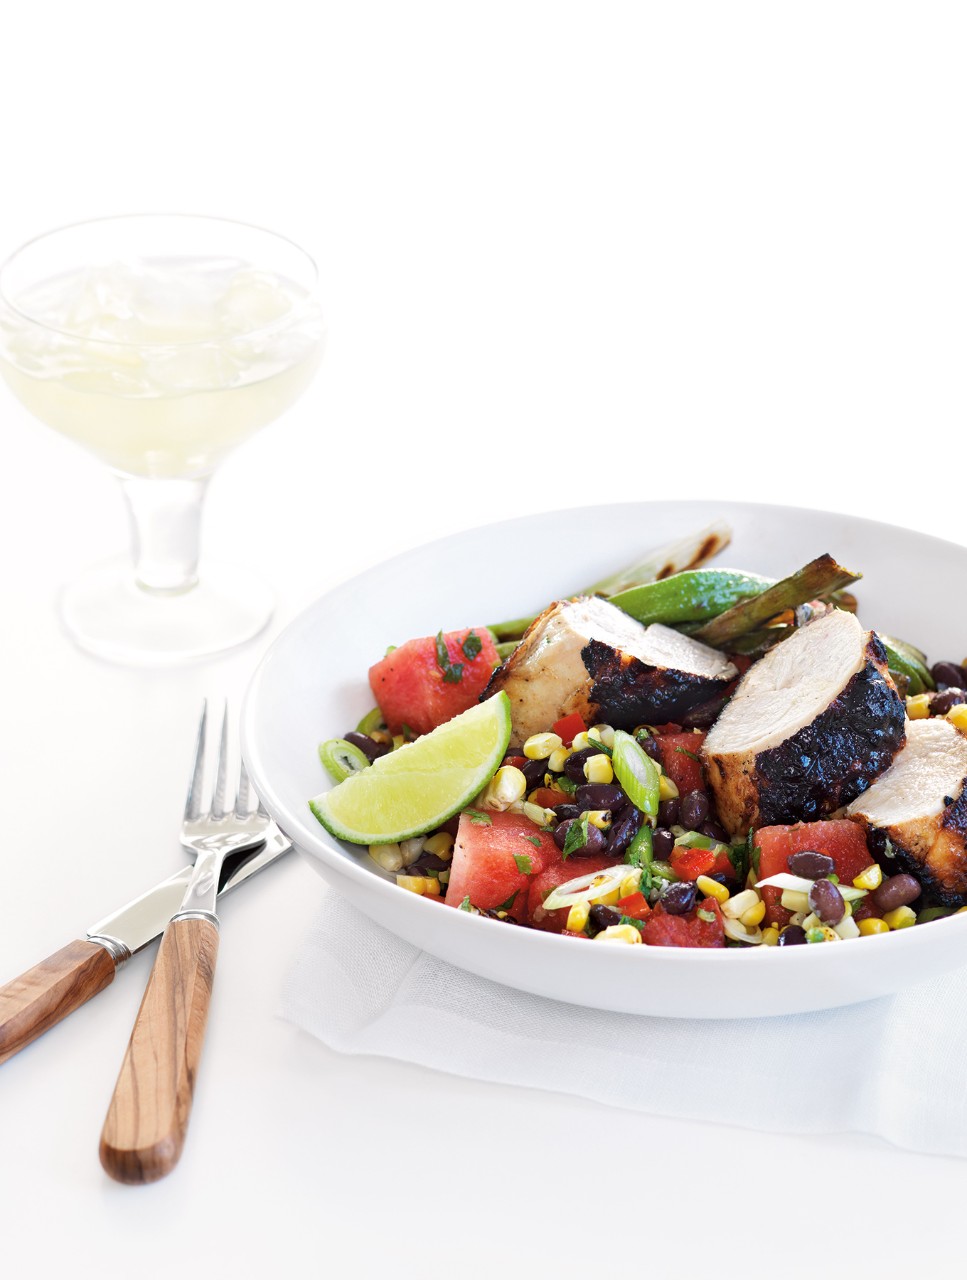 Tequila-Lime Grilled Chicken Breast